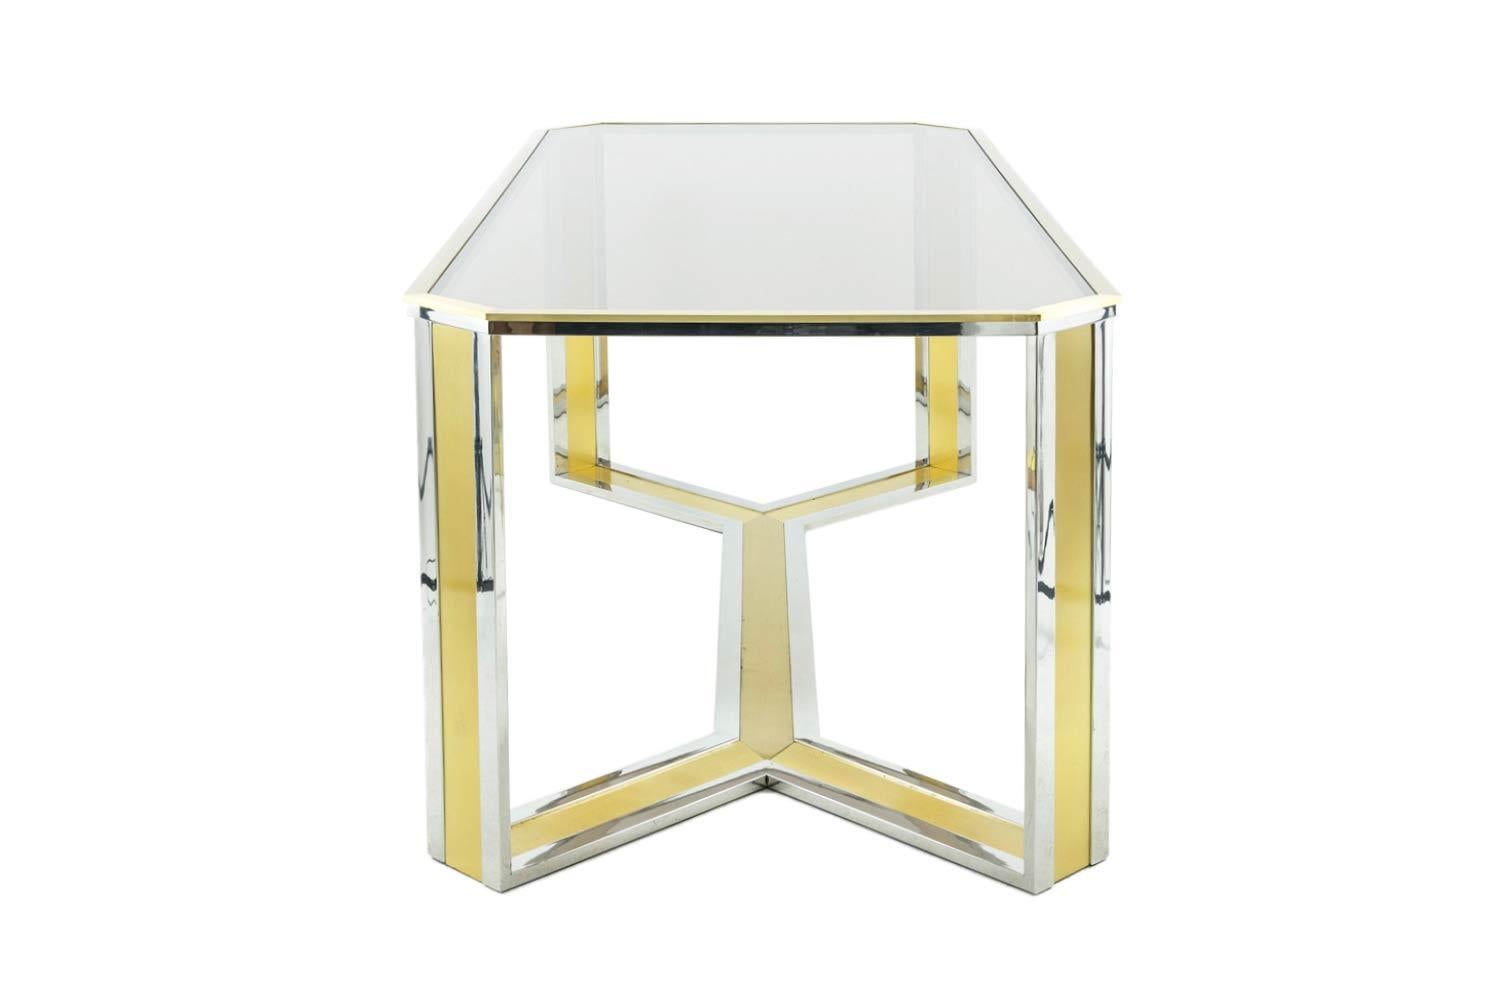 Post-Modern Romeo Rega Style Table in Chromed and Gilt Brass, Smoked Glass, 1970s